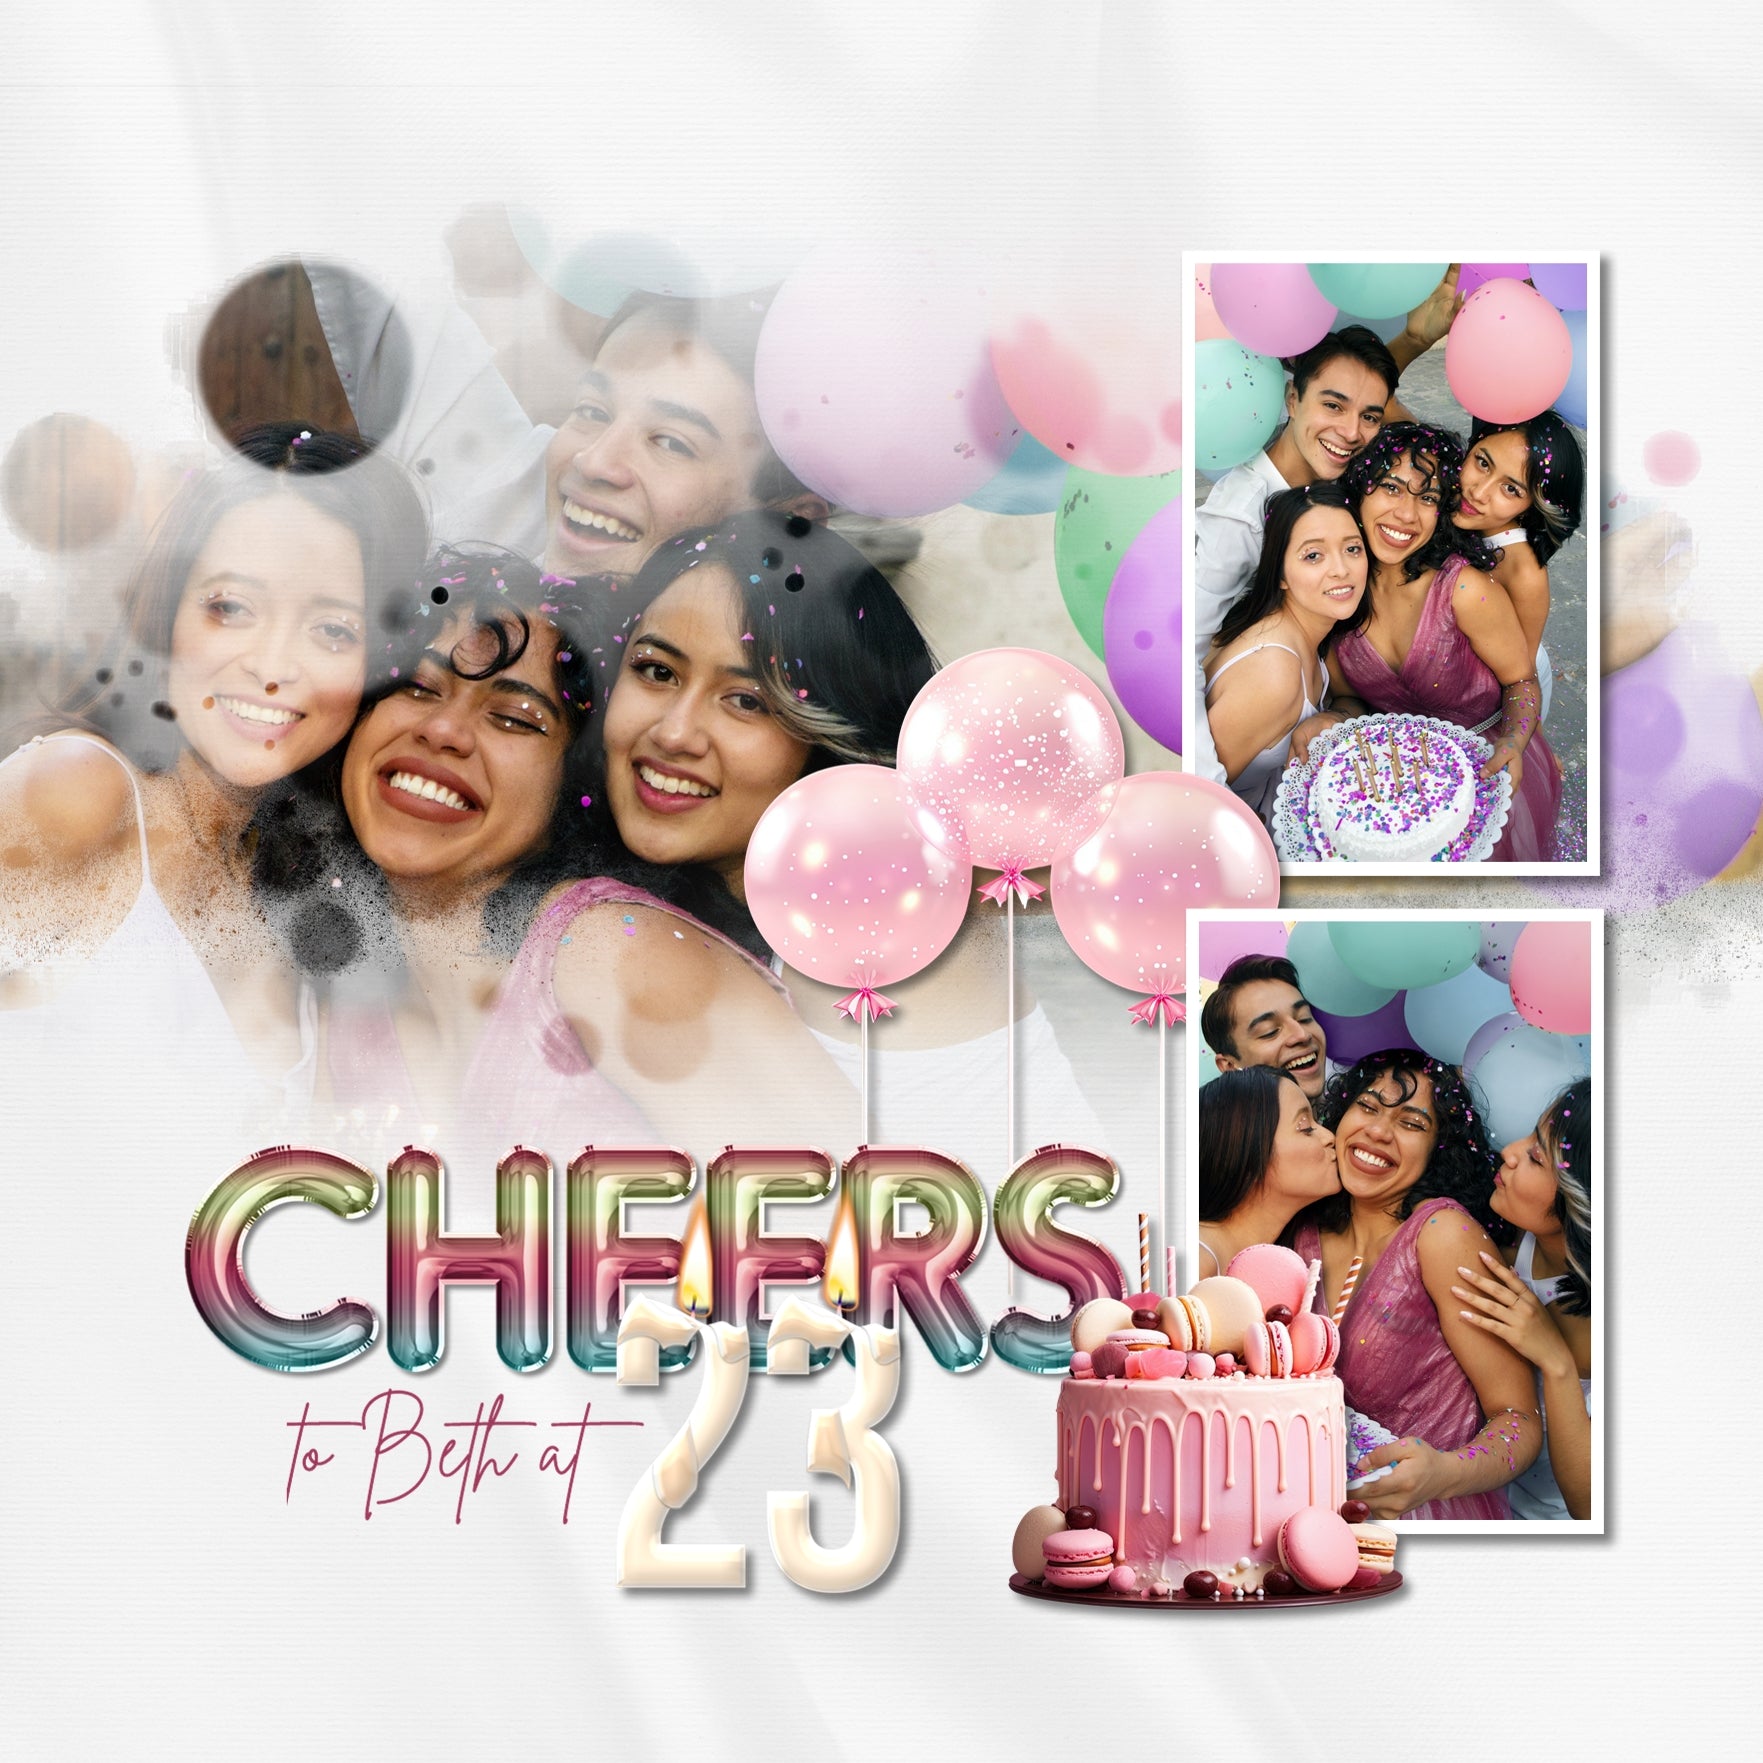 Enjoy the memories created with your girlfriends as you celebrate your birthdays together. These fun rainbow birthday balloon digital scrapbooking alphabet letters and numbers by Lucky Girl Creative Digital Art will add style to all your digital pages. Great for creating greeting cards and party decor! The Birthday Girlfriend Balloon Alpha Set consists of a full set of digital art uppercase letters A-Z and numbers 0-9.